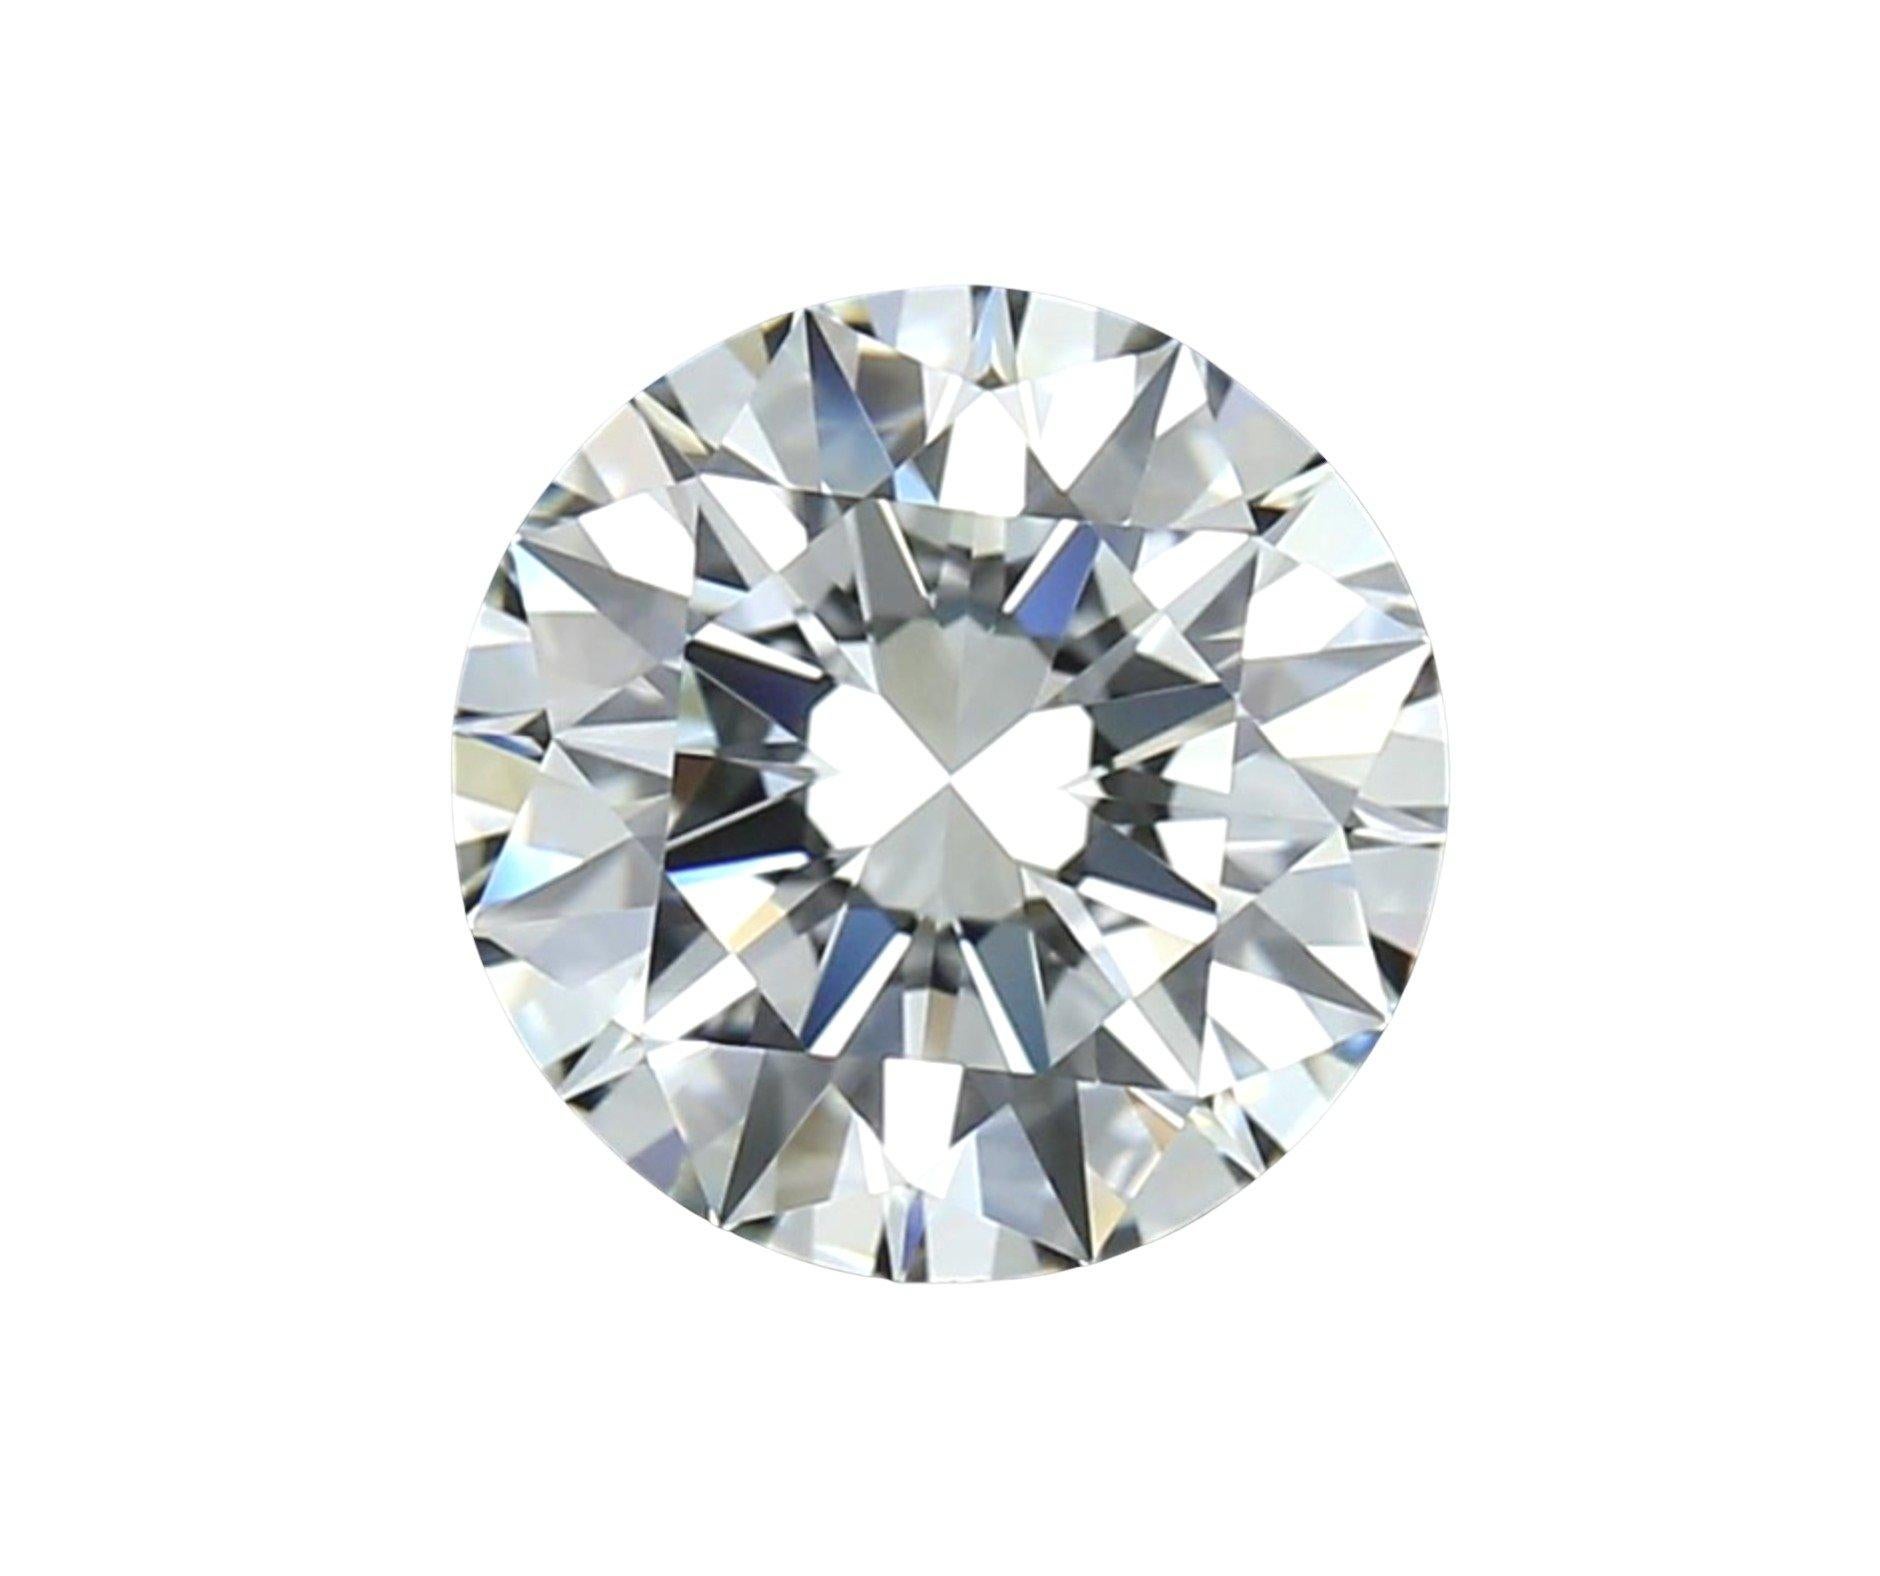 Sparkling natural cut round brilliant diamond in a 1.03 carat I VVS1 WITH excellent IDEAL cut.
This diamond comes with GIA Certificate and laser inscription number.
EXTREMLY SPARKLES

SKU: C-DSPV-167351-6
GIA 2454135801